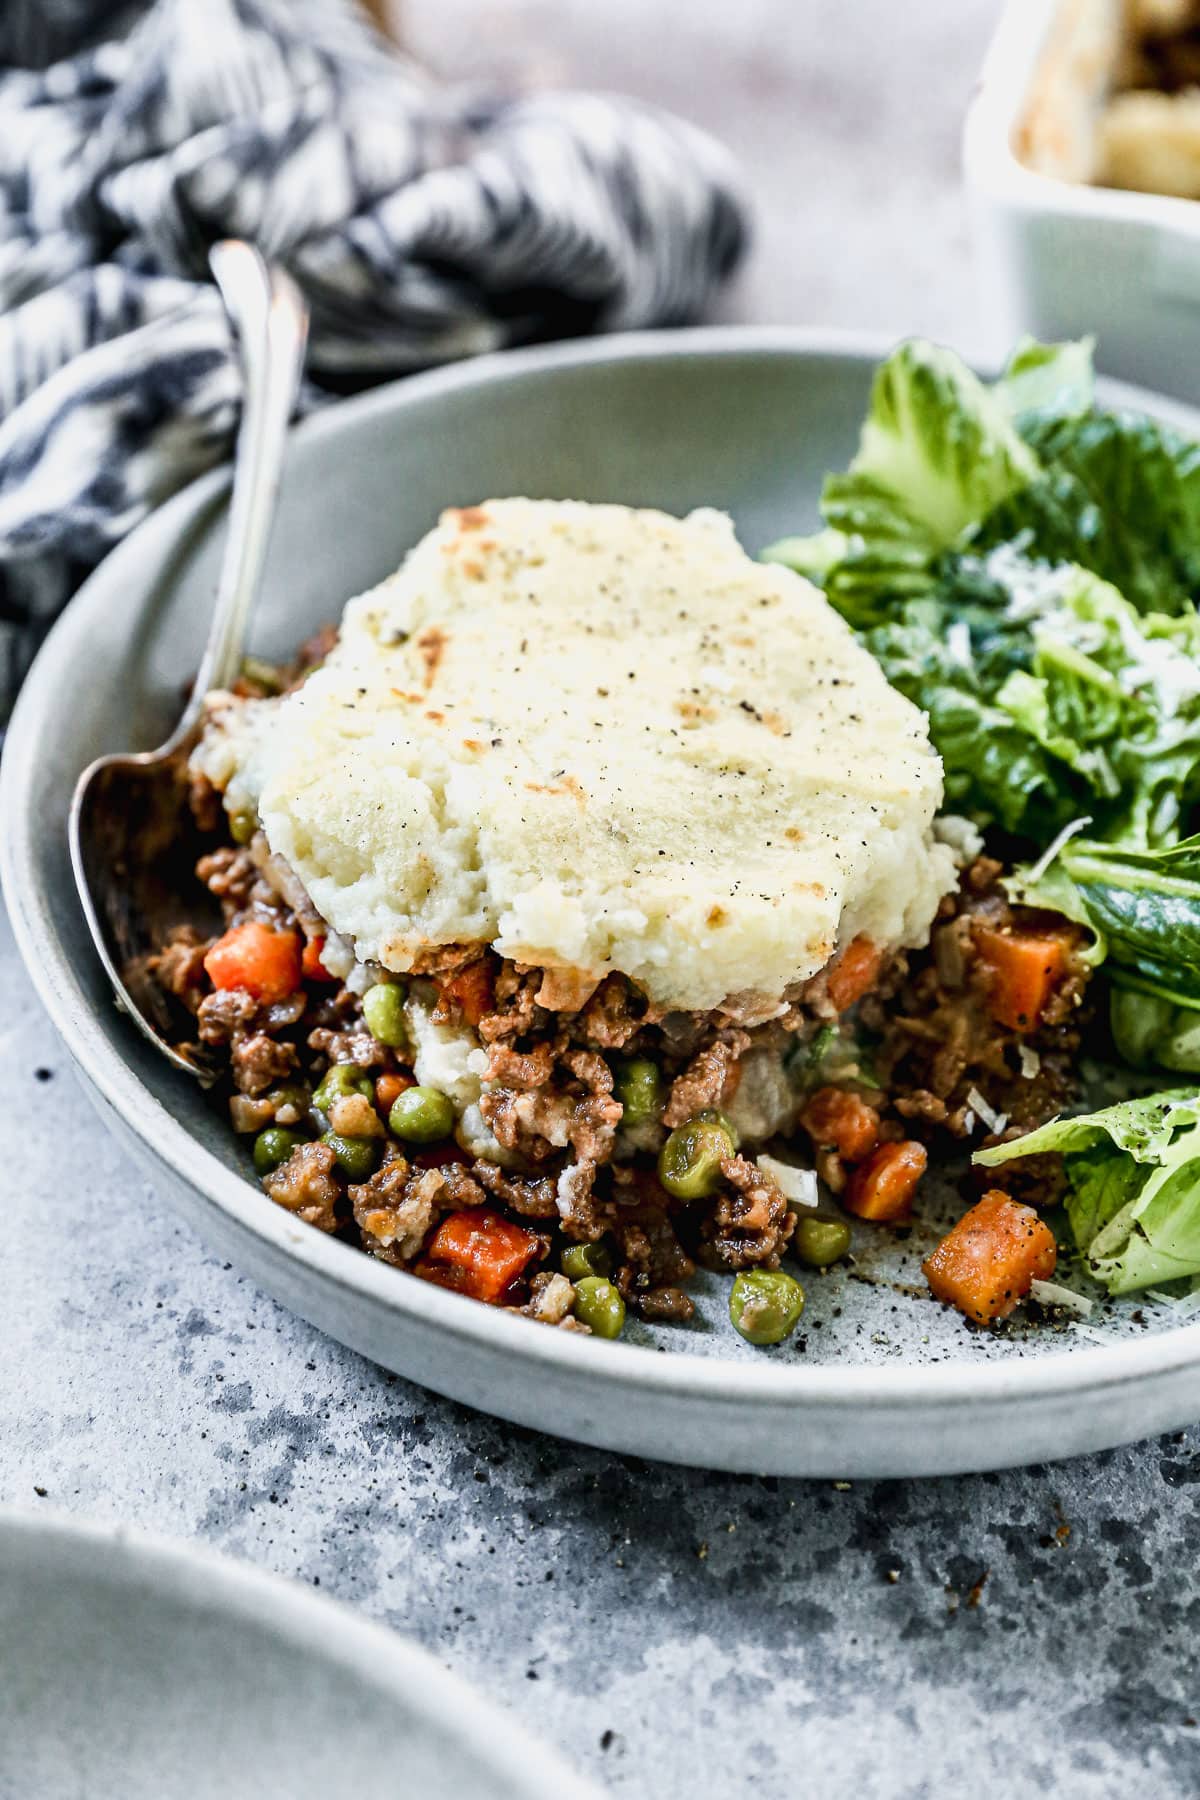 Easy shepherd's pie served on a plate with lettuce